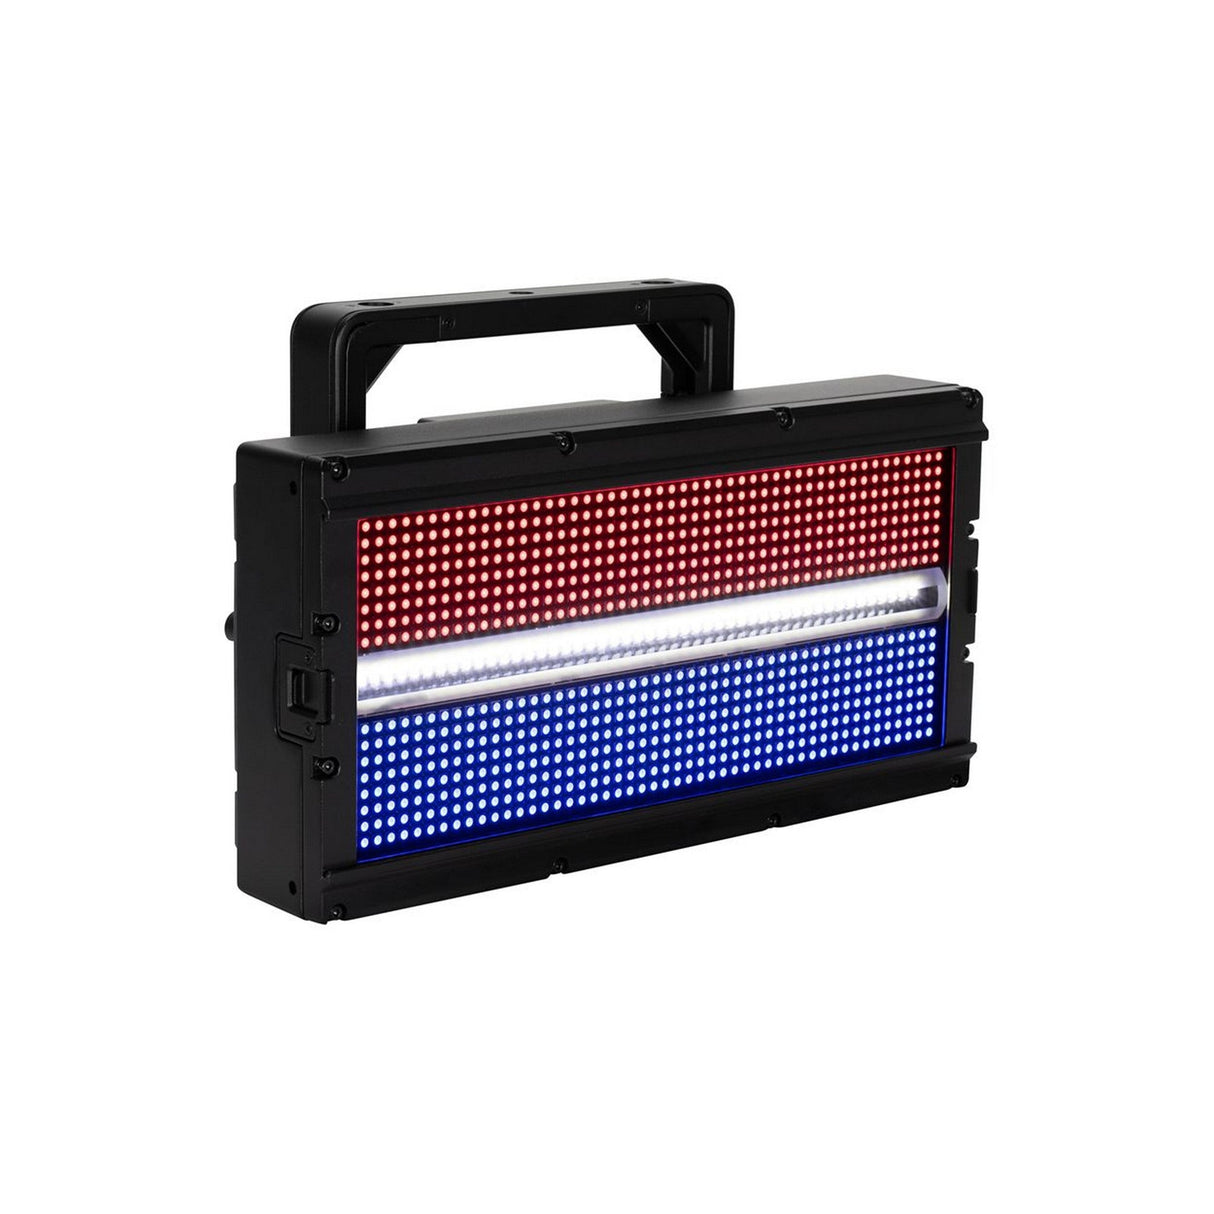 ADJ Jolt Panel FXIP IP65 CW and RGB LED Strobe with Wired Digital Communication Network